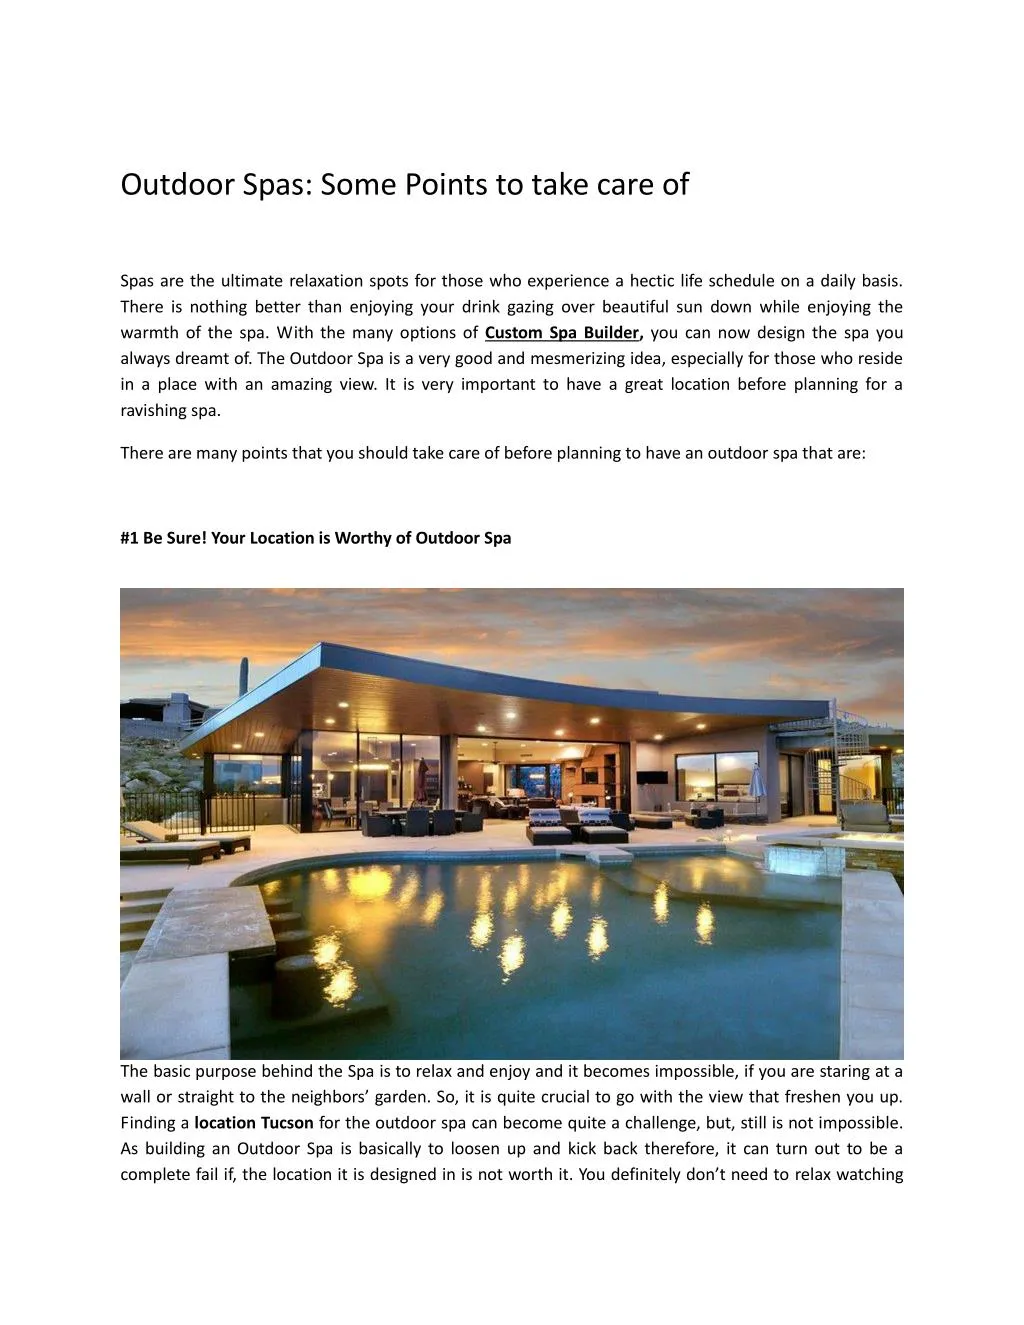 outdoor spas some points to take care of